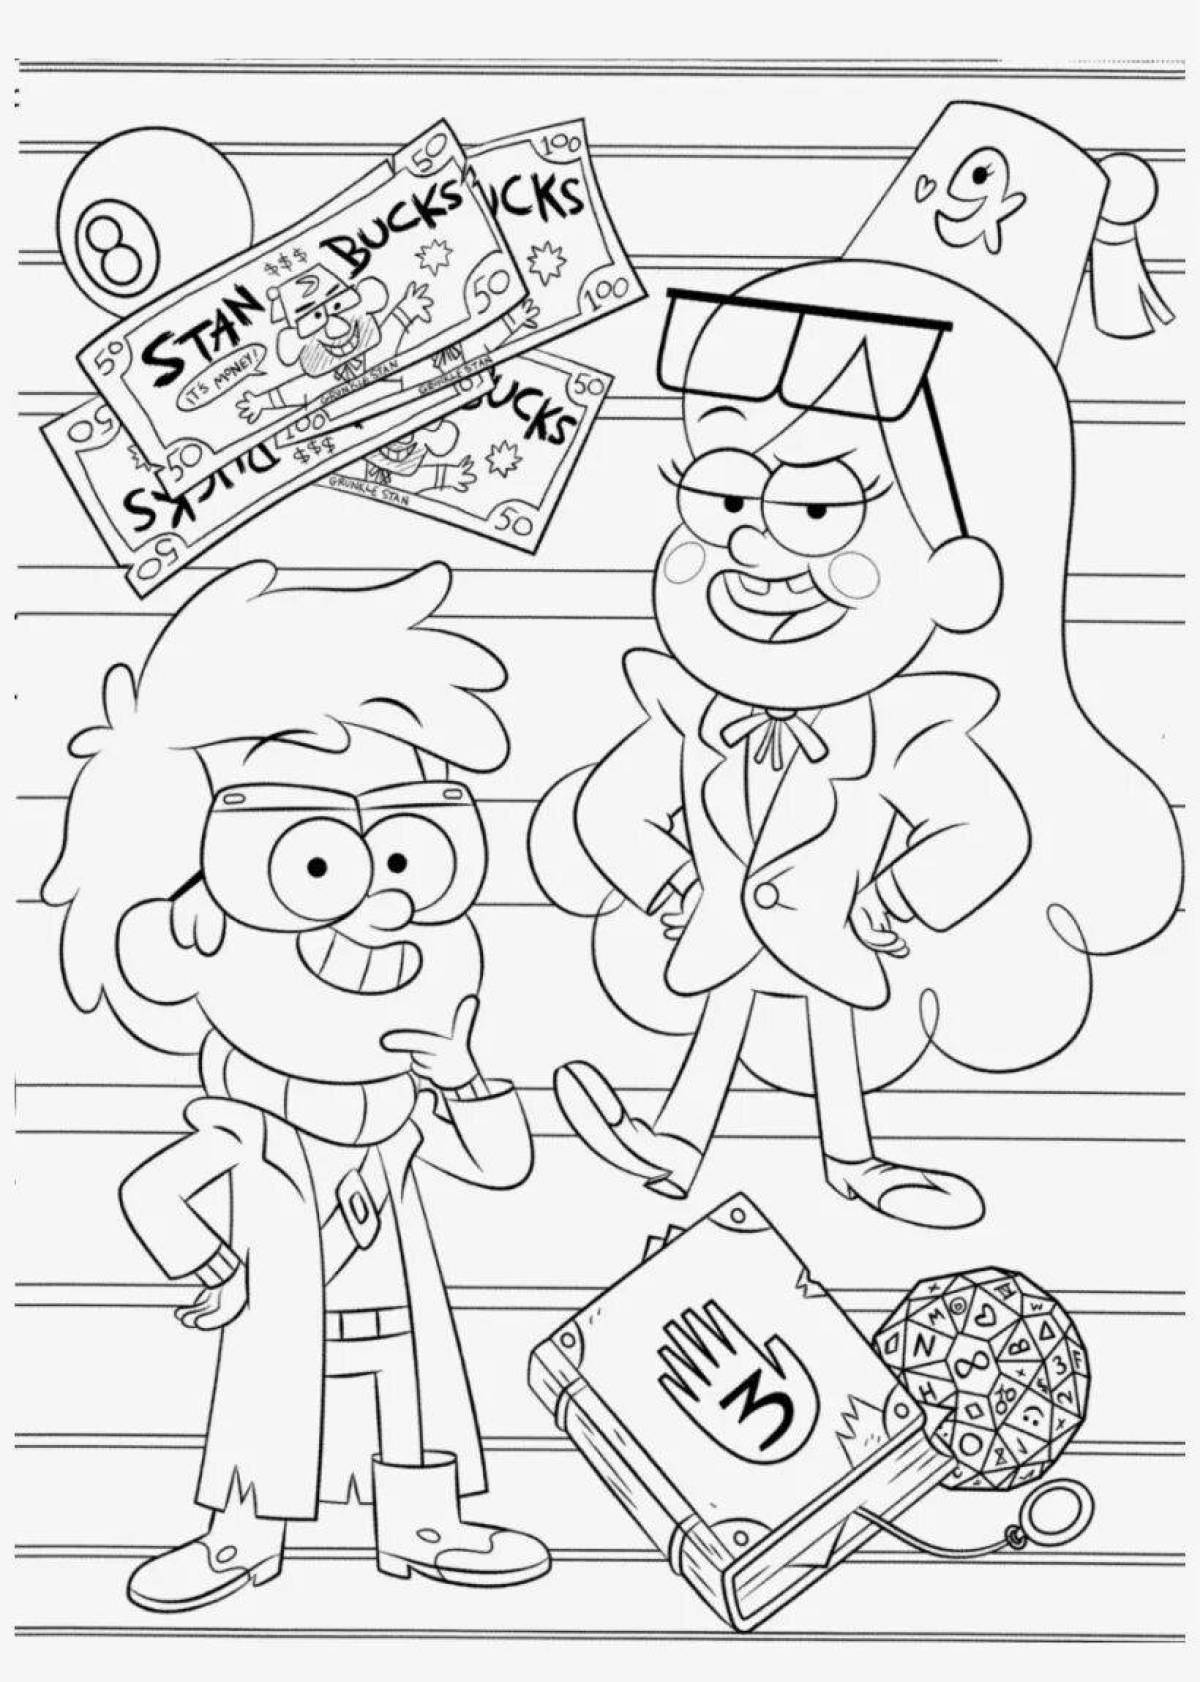 Exciting gravity falls stickers